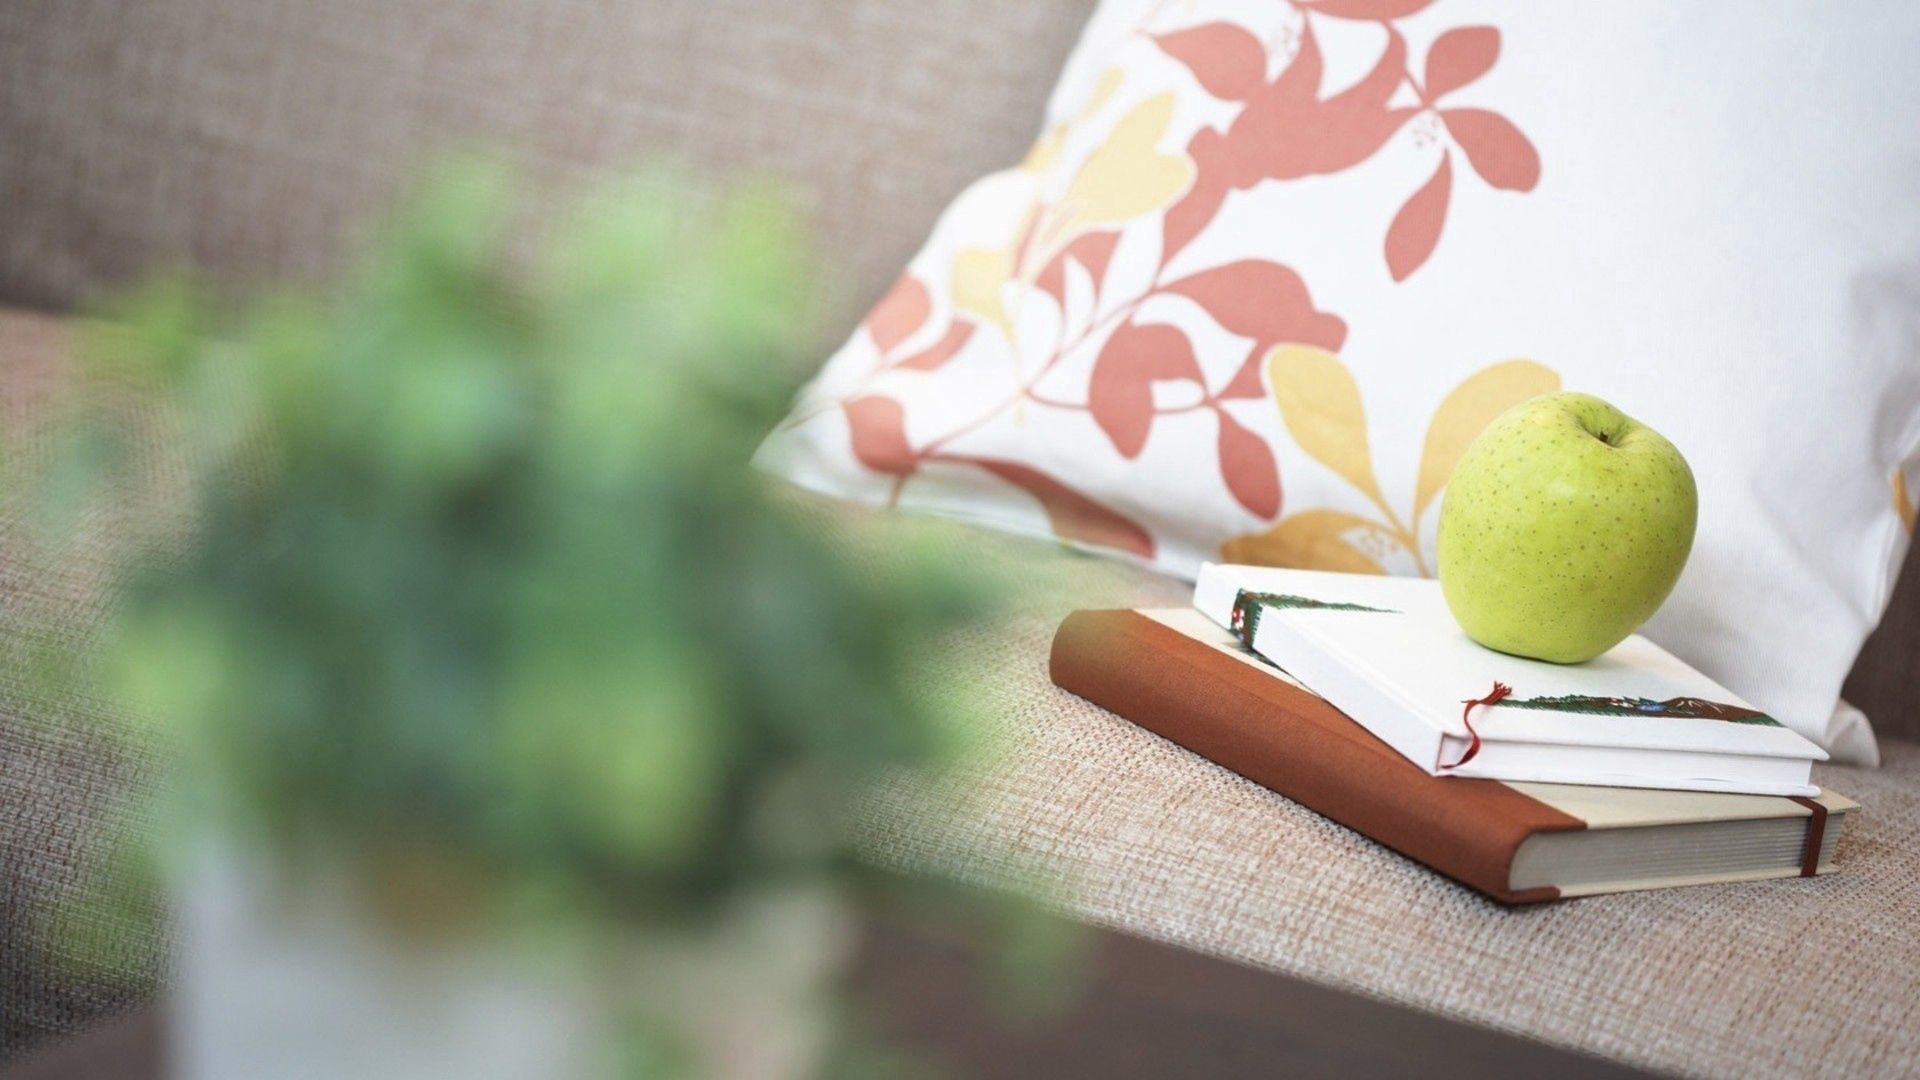 apple, books, miscellanea, miscellaneous, blur, smooth, cushions, pillows images